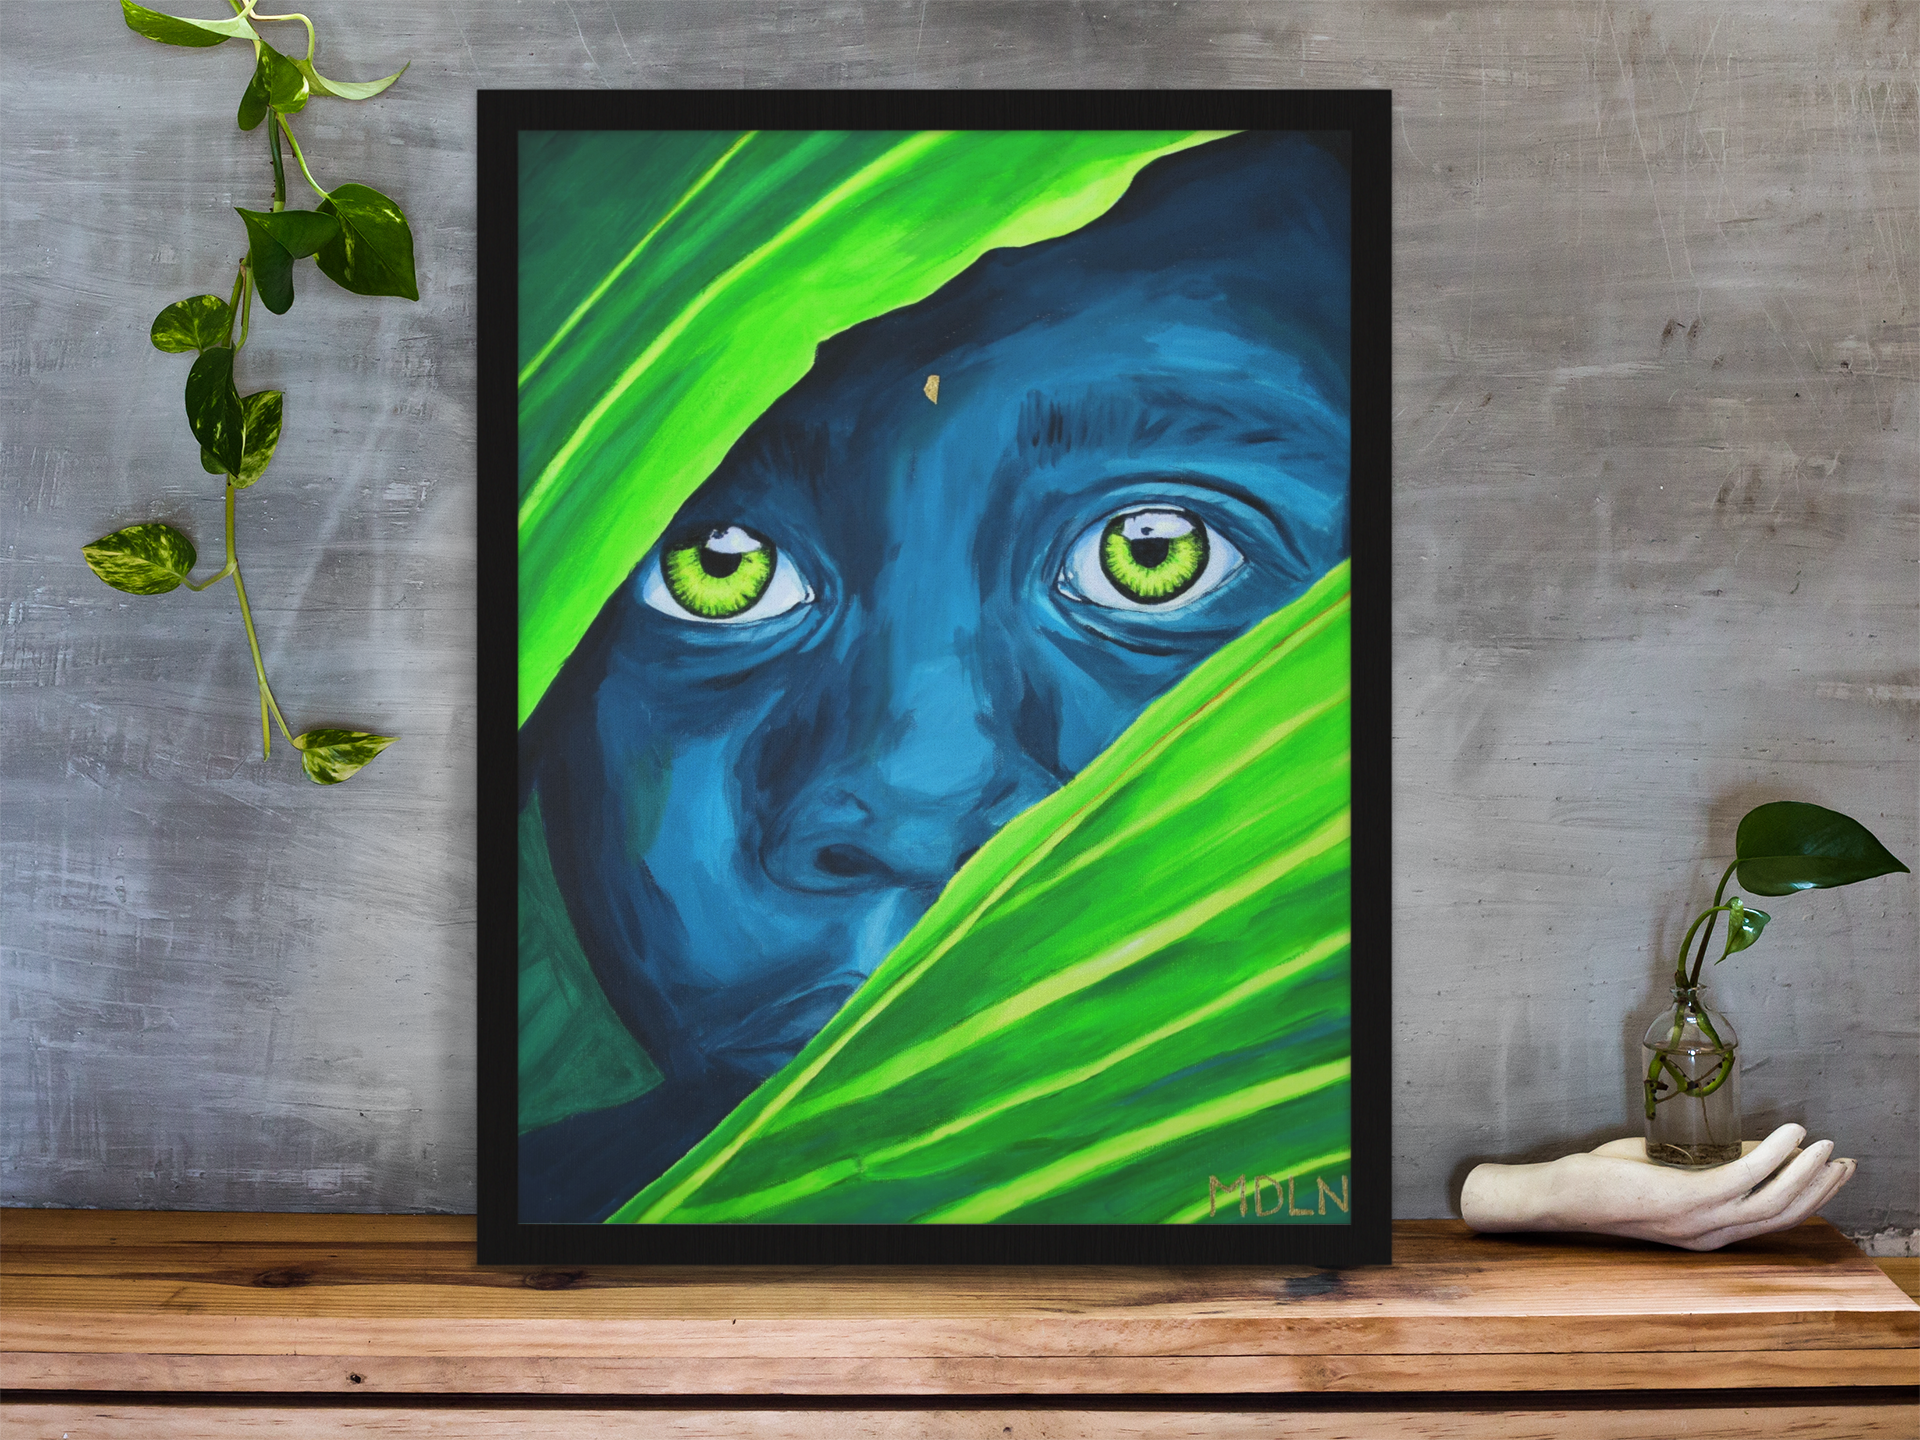 A small but beautiful giclee art print of an African Boy, framed, leaning up against a wall on a wooden table